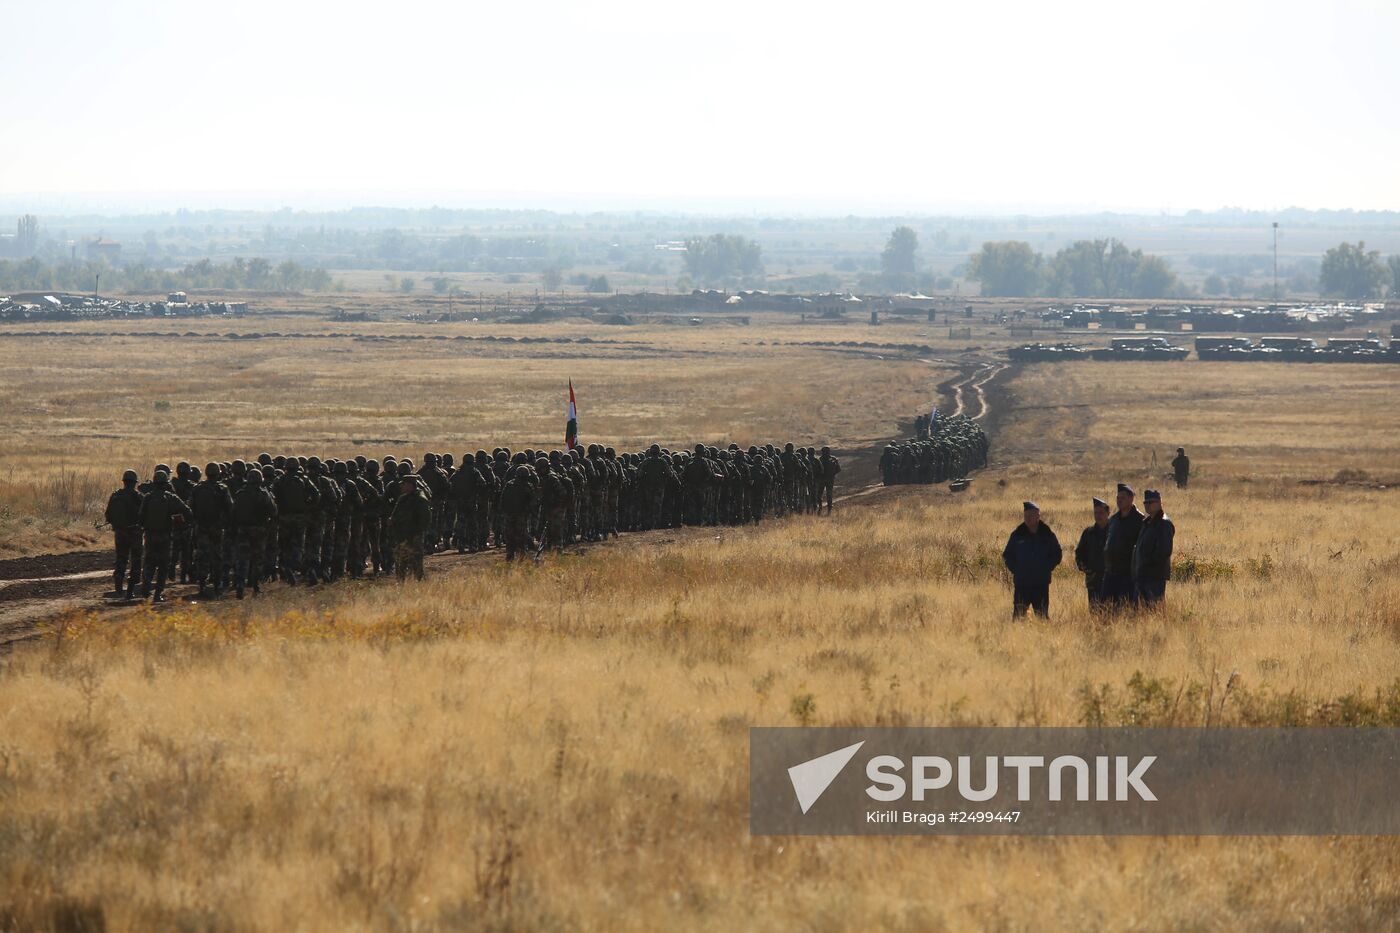 Joint Russian-Indian drills Indra-2014 kick off